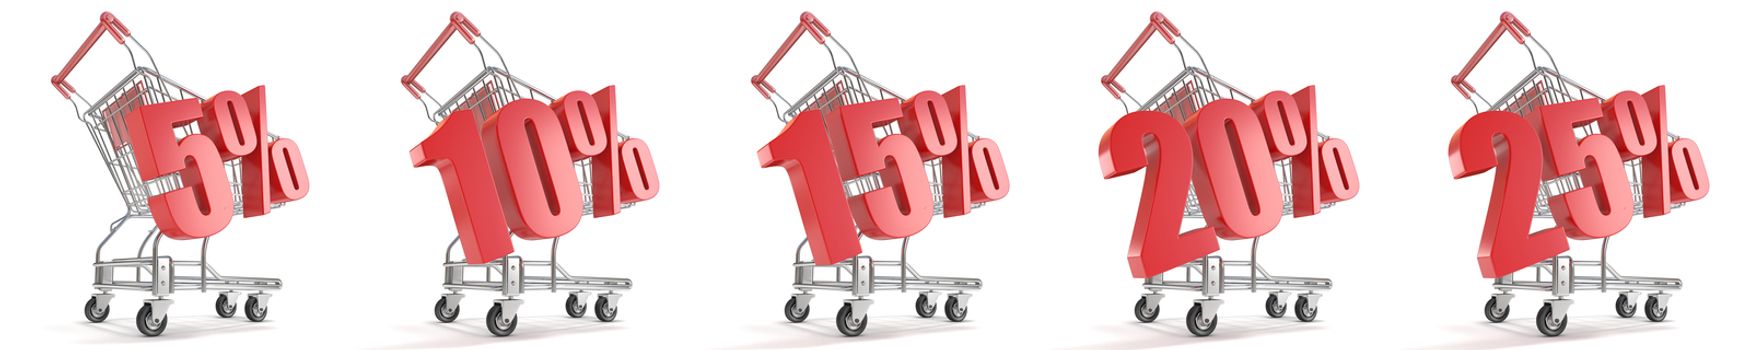 5%, 10%, 15%, 20%, 25%  percent discount in front of shopping cart. Sale concept. 3D render illustration isolated on white background